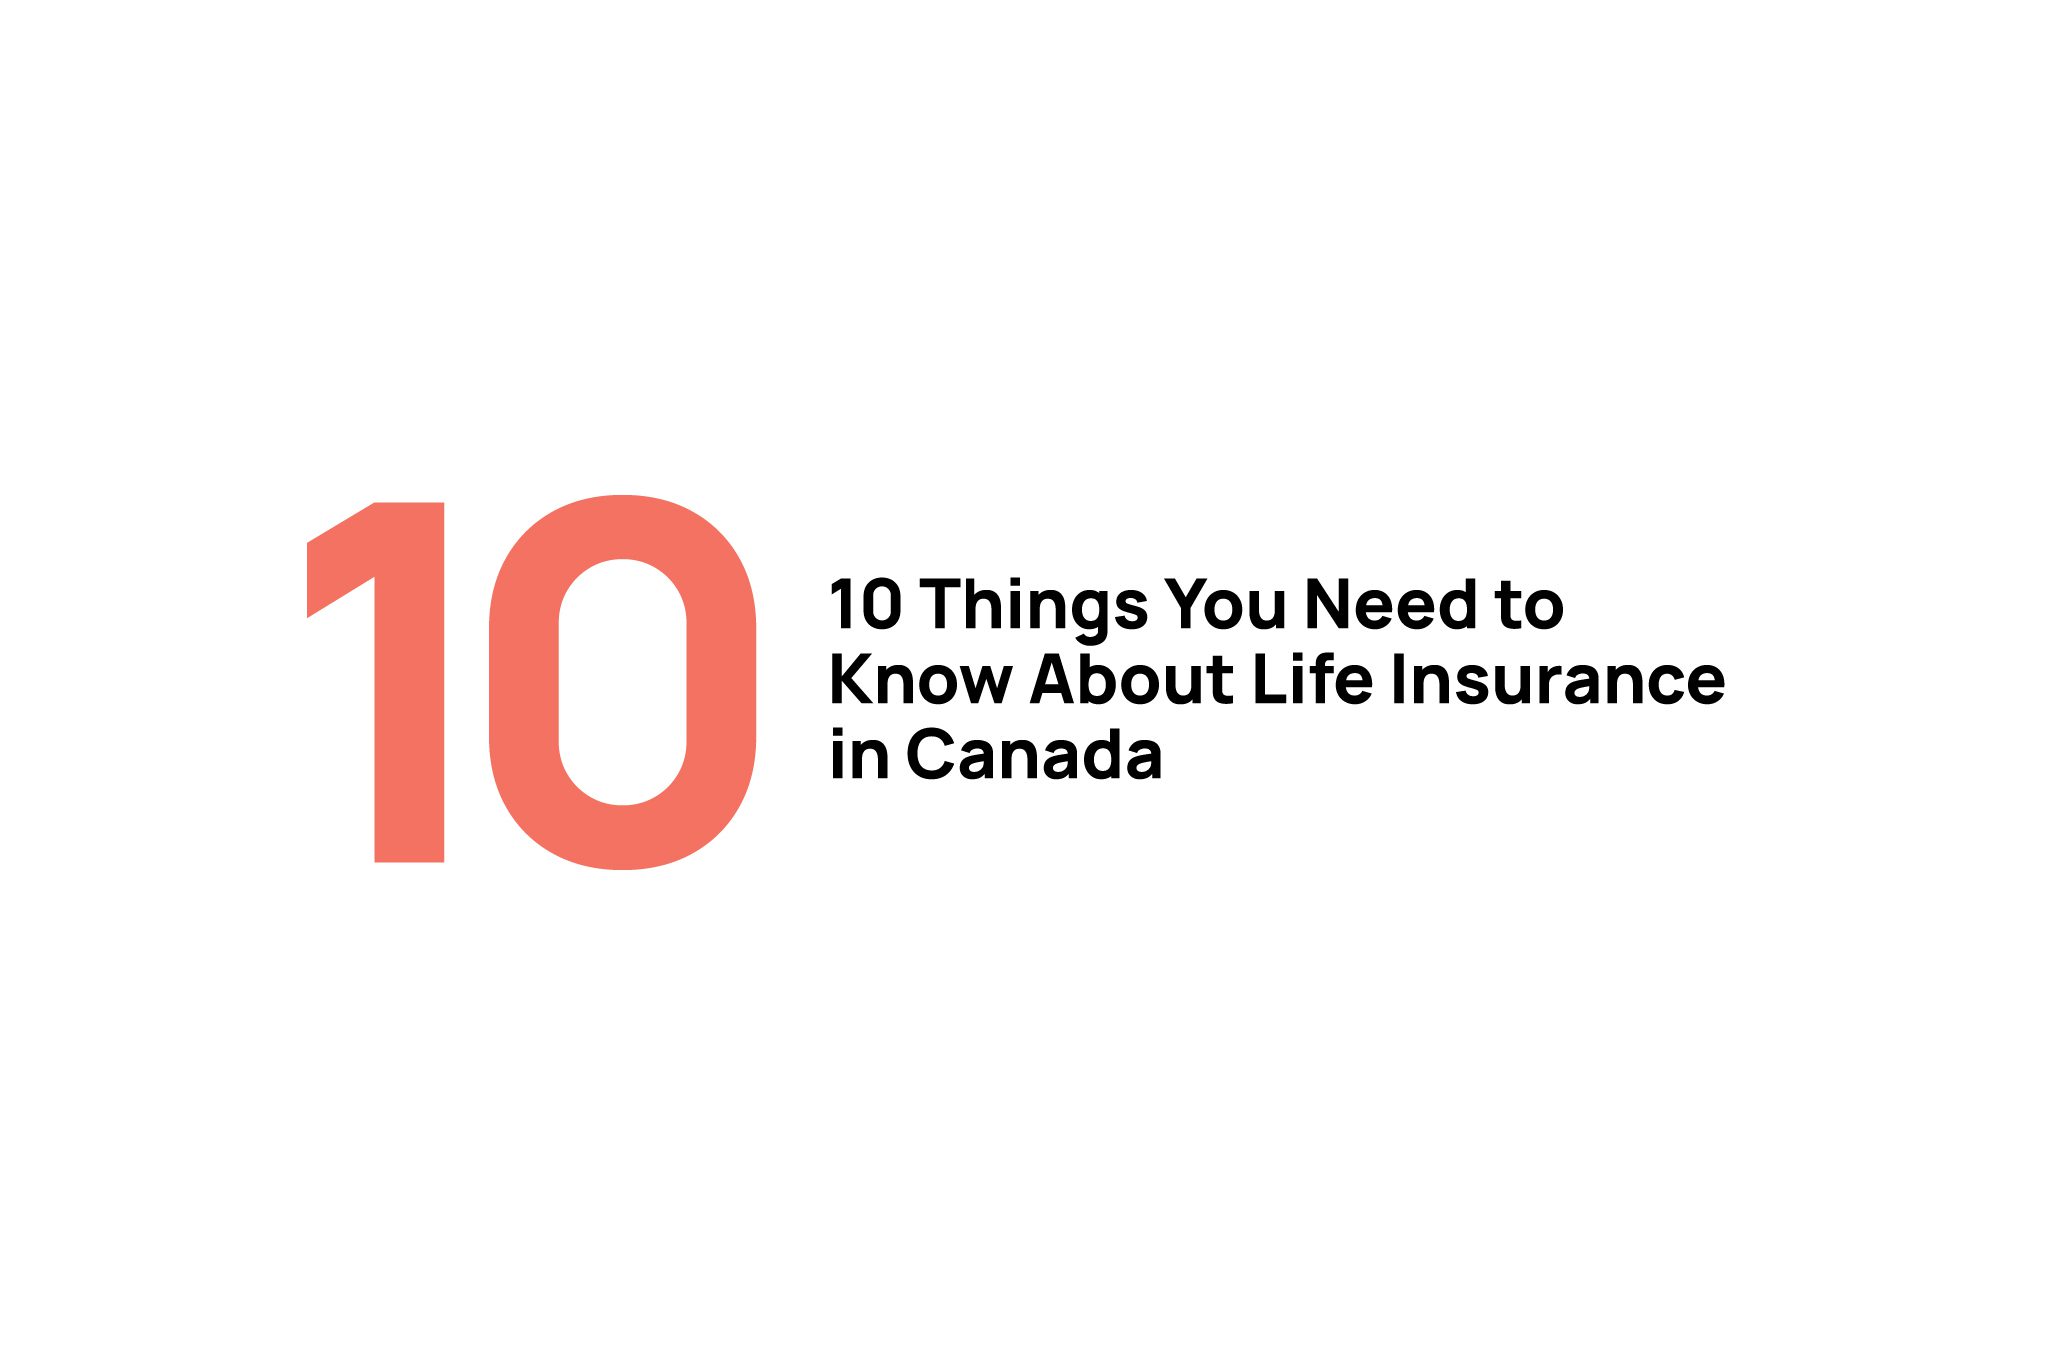 10 Things You Need to Know About Life Insurance in Canada